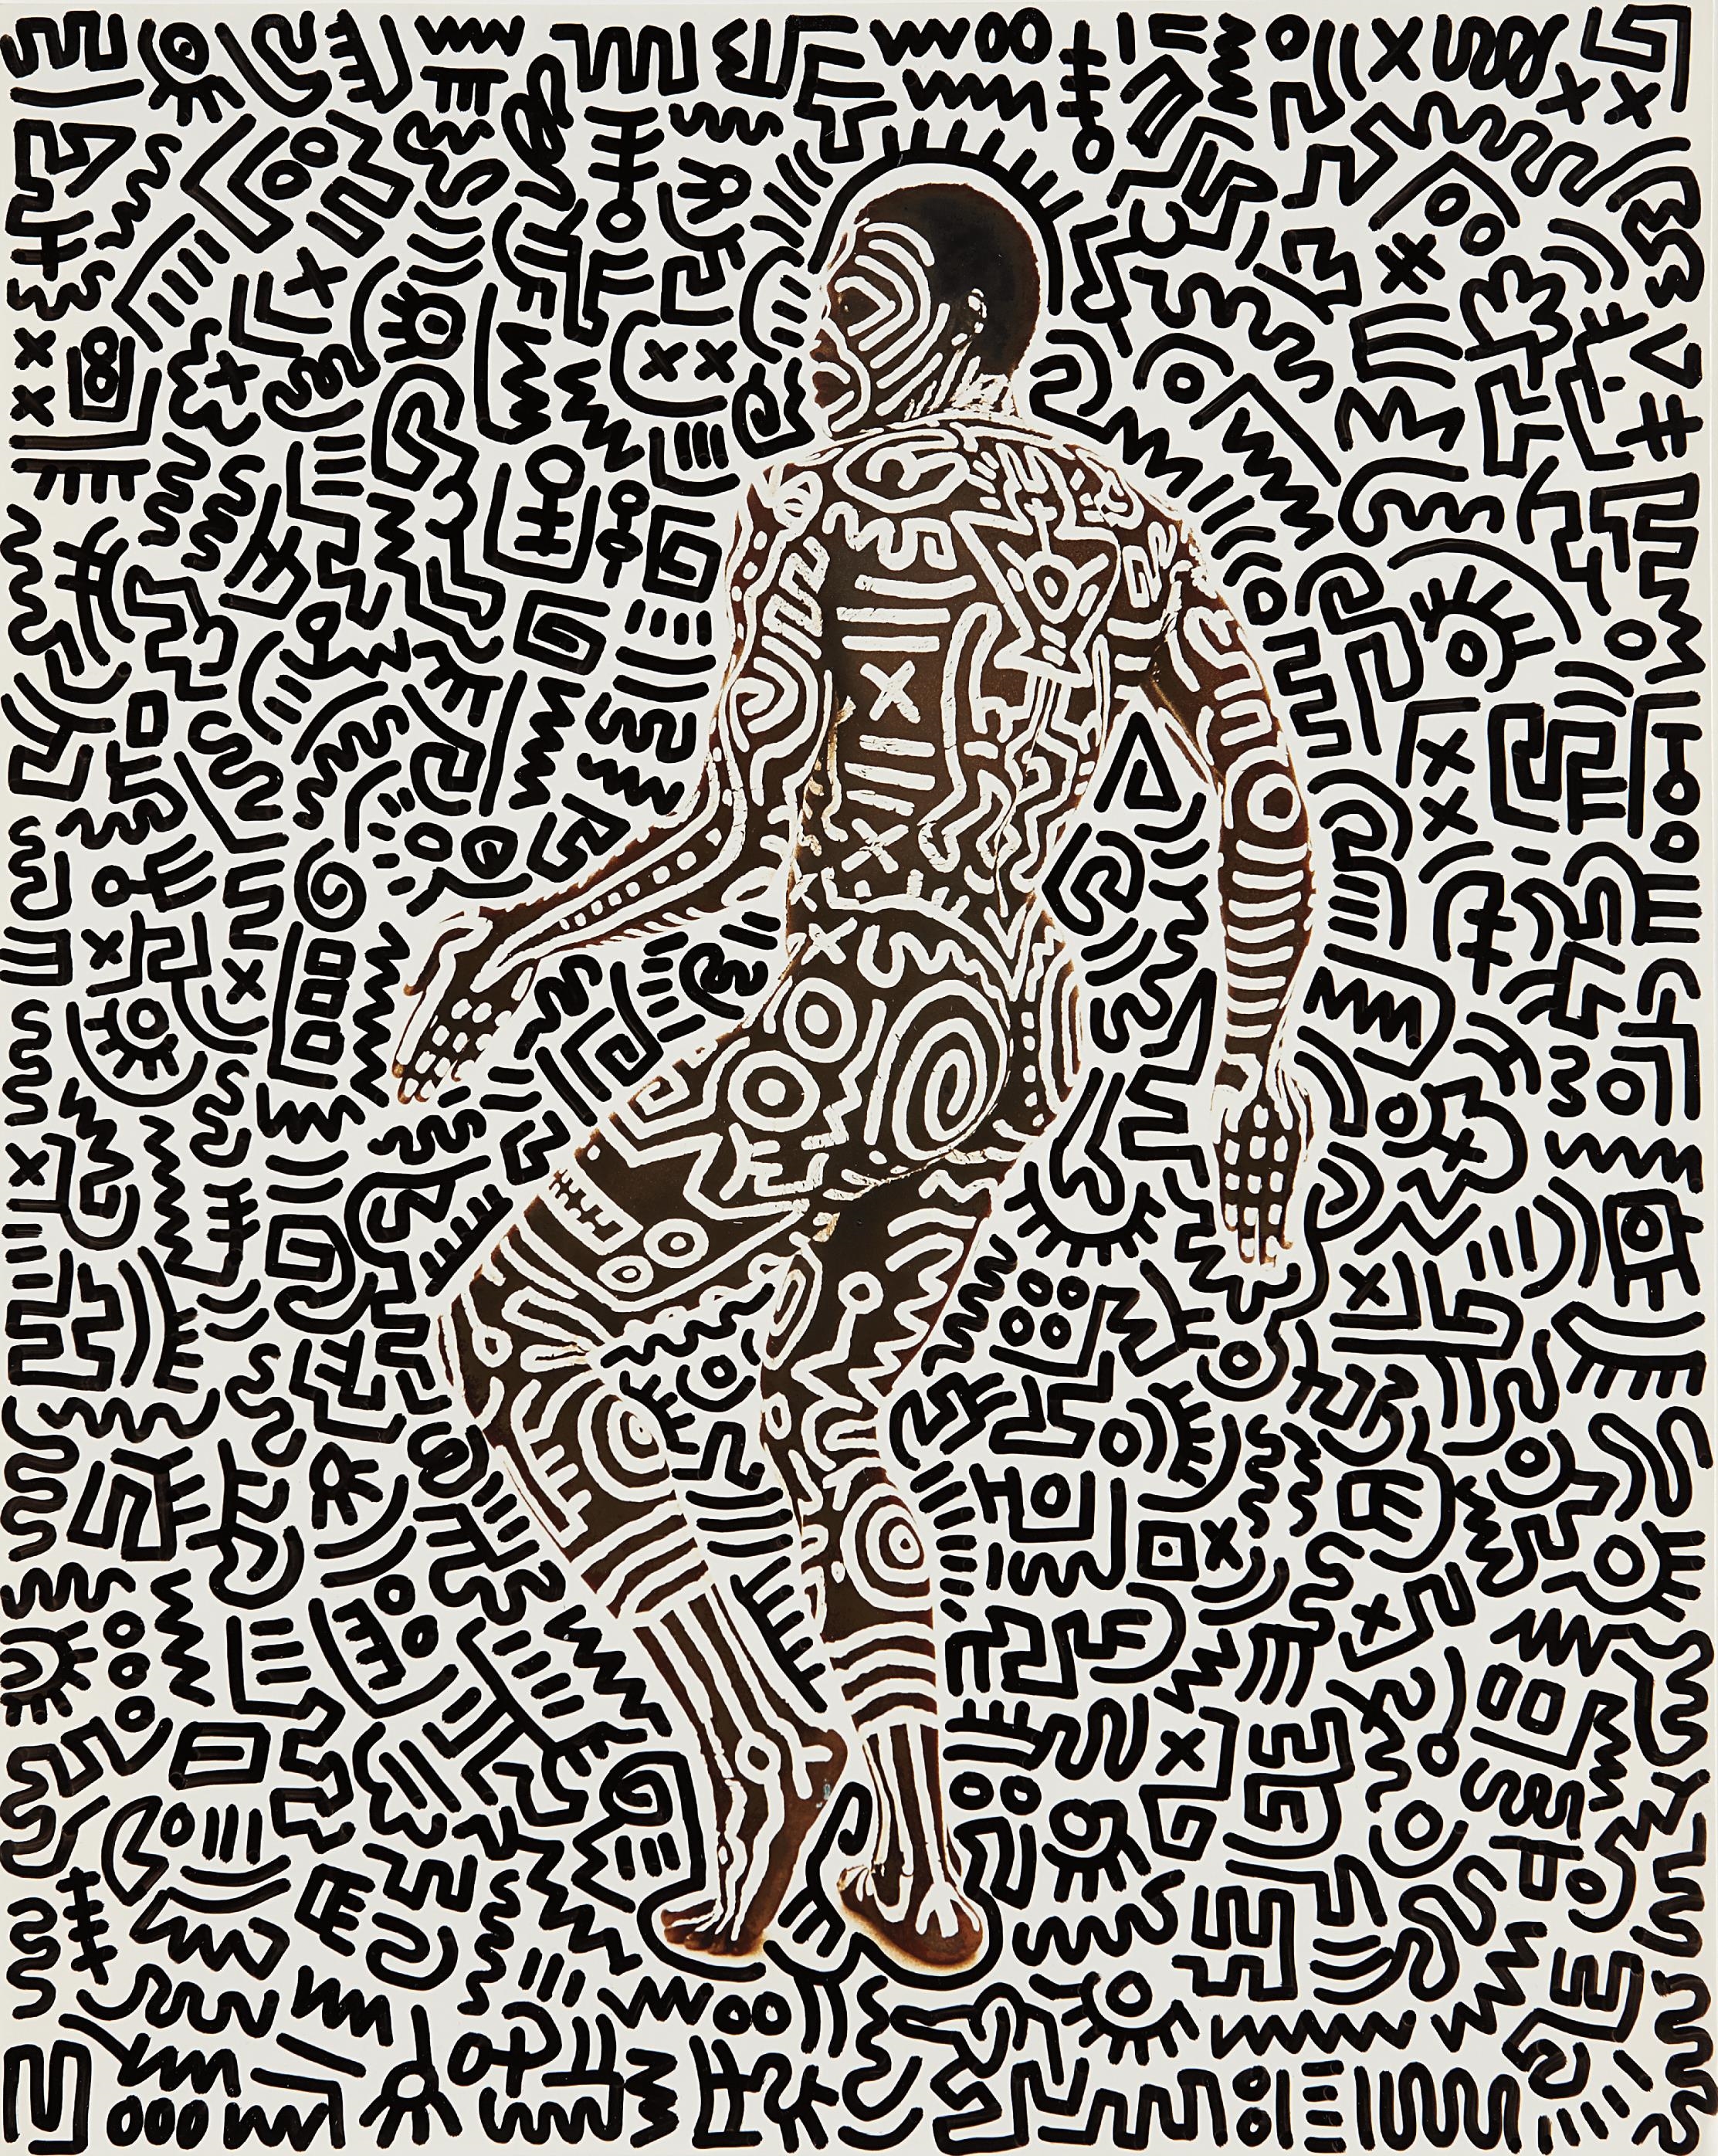 Artwork by Keith Haring, Untitled (Bill T. Jones), Made of ink on photograp...